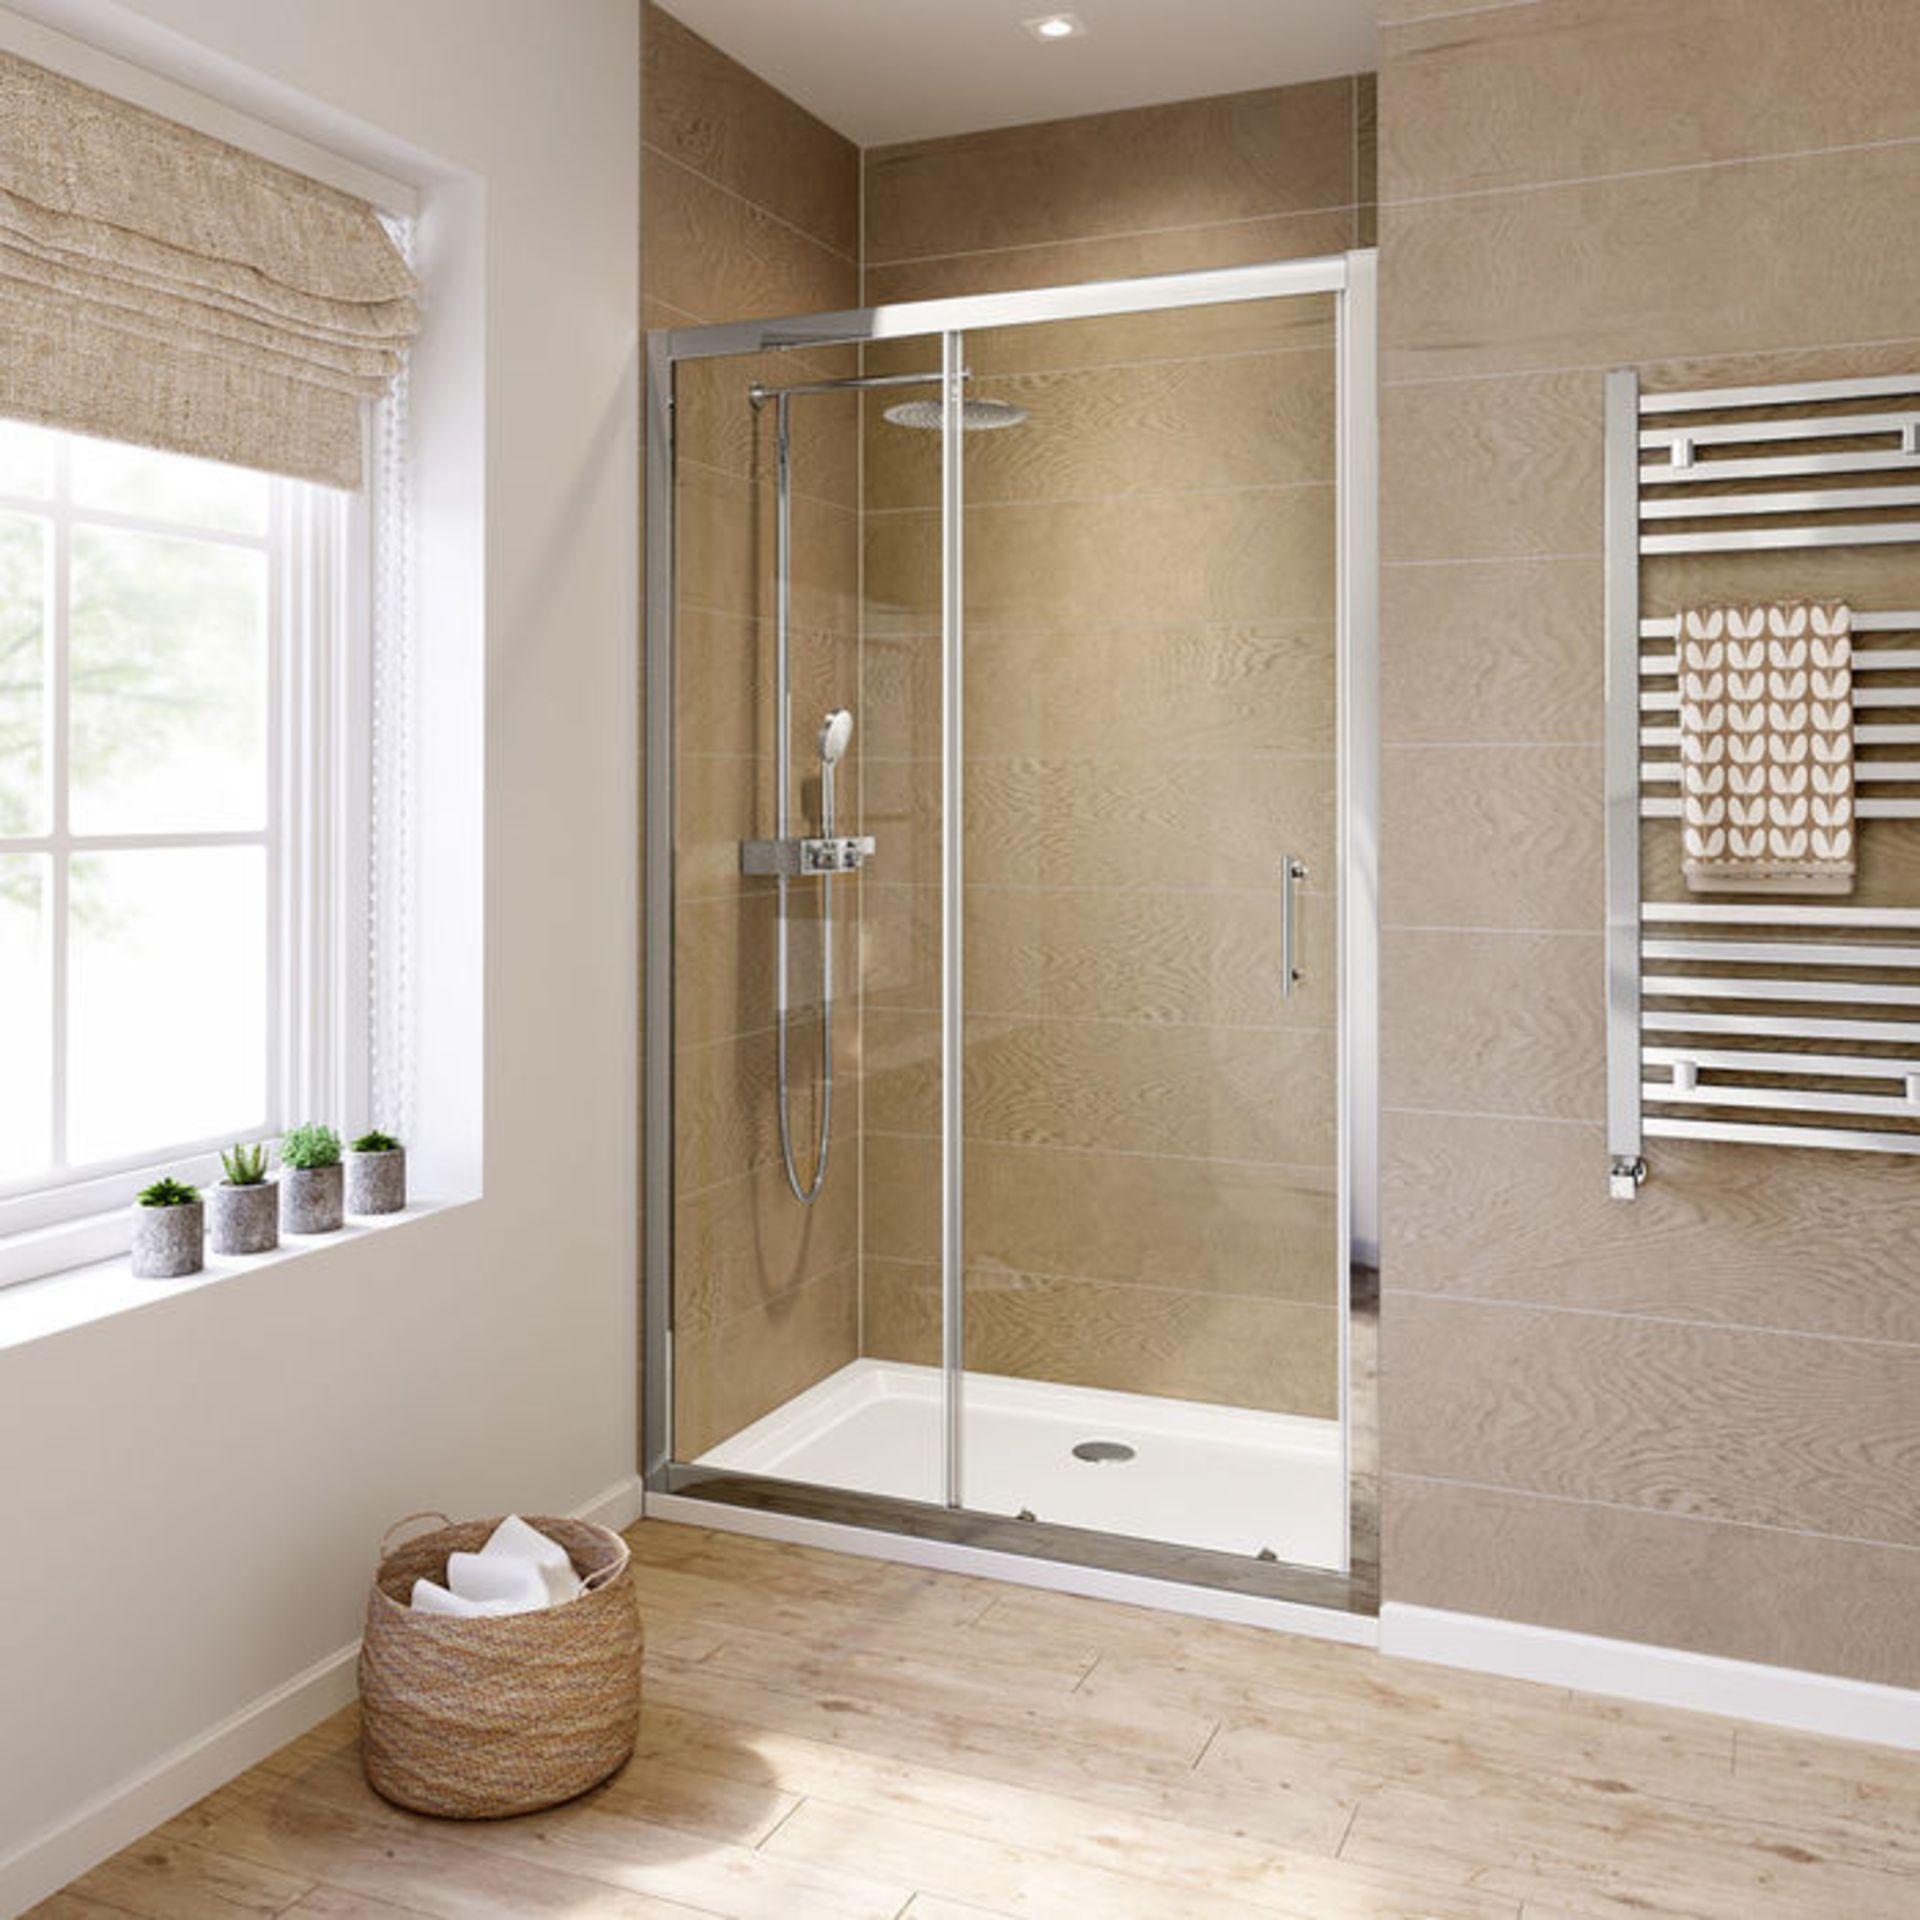 (PT20) 1200mm - 6mm - Elements Sliding Shower Door. RRP £299.99. 6mm Safety Glass Fully waterproof - Image 4 of 5